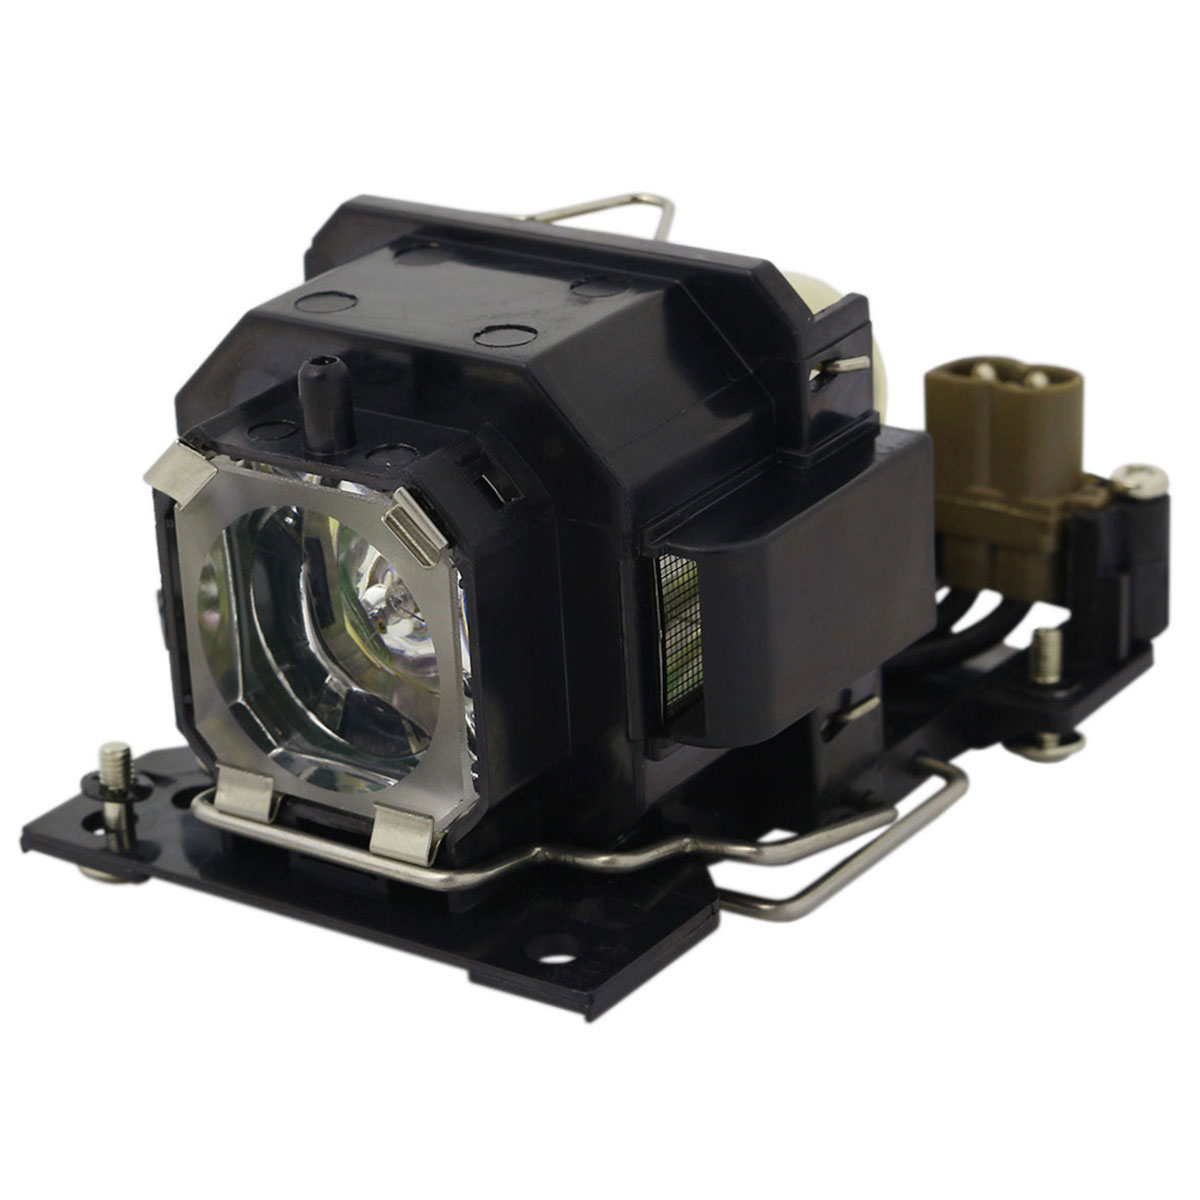 OEM DT00781 Replacement Lamp and Housing for Hitachi Projectors - image 2 of 6